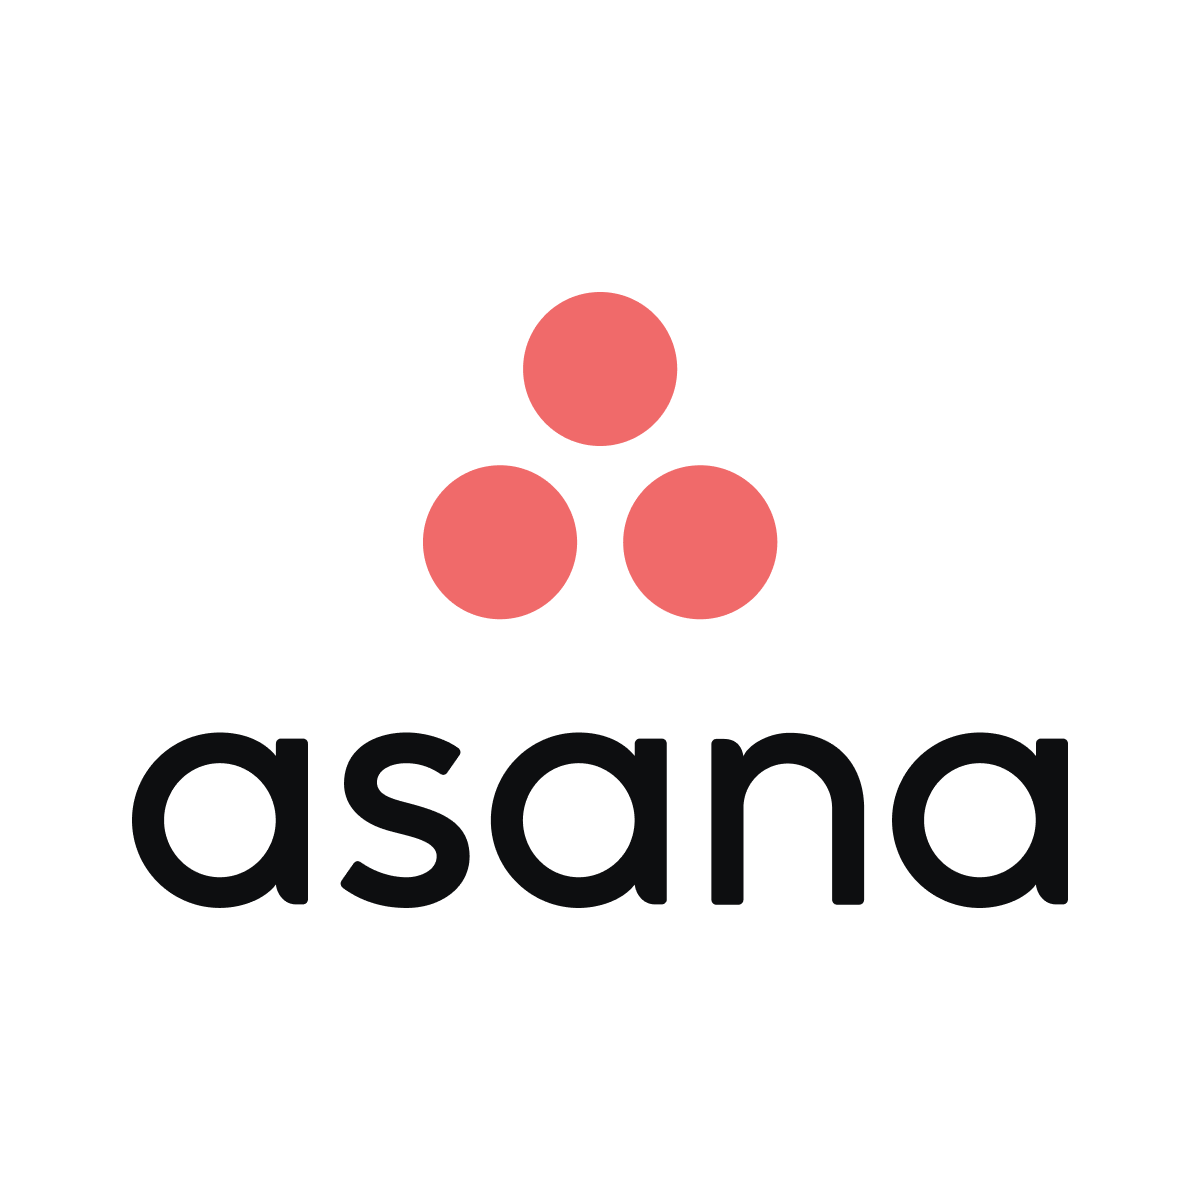 asana project management software free download